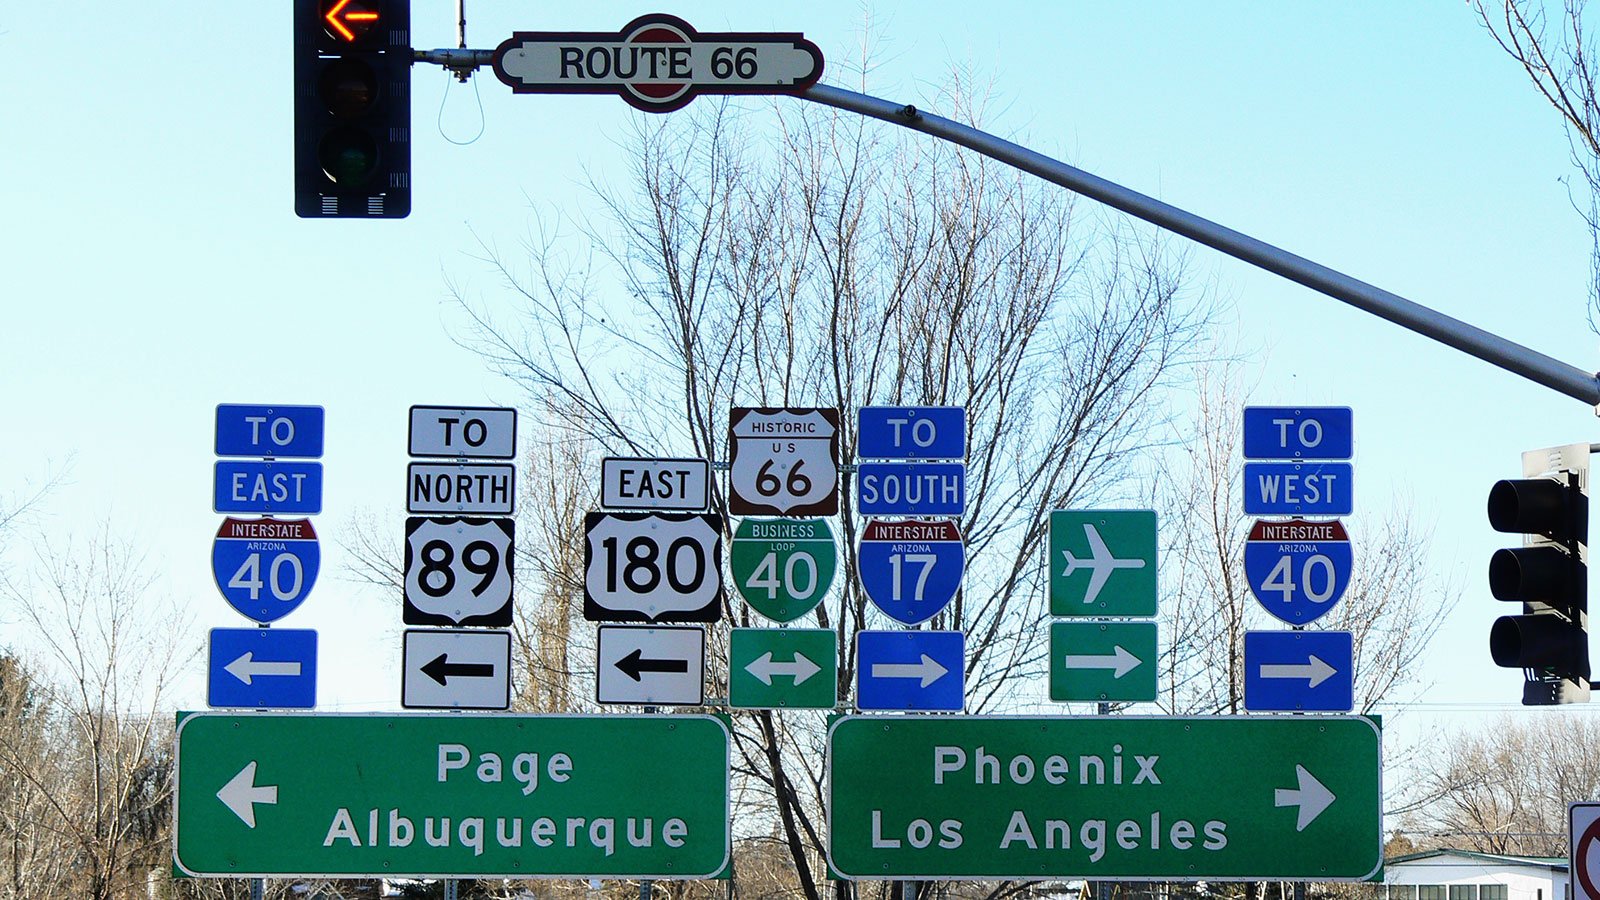 The intersection of several highways in Flagstaff, Arizona